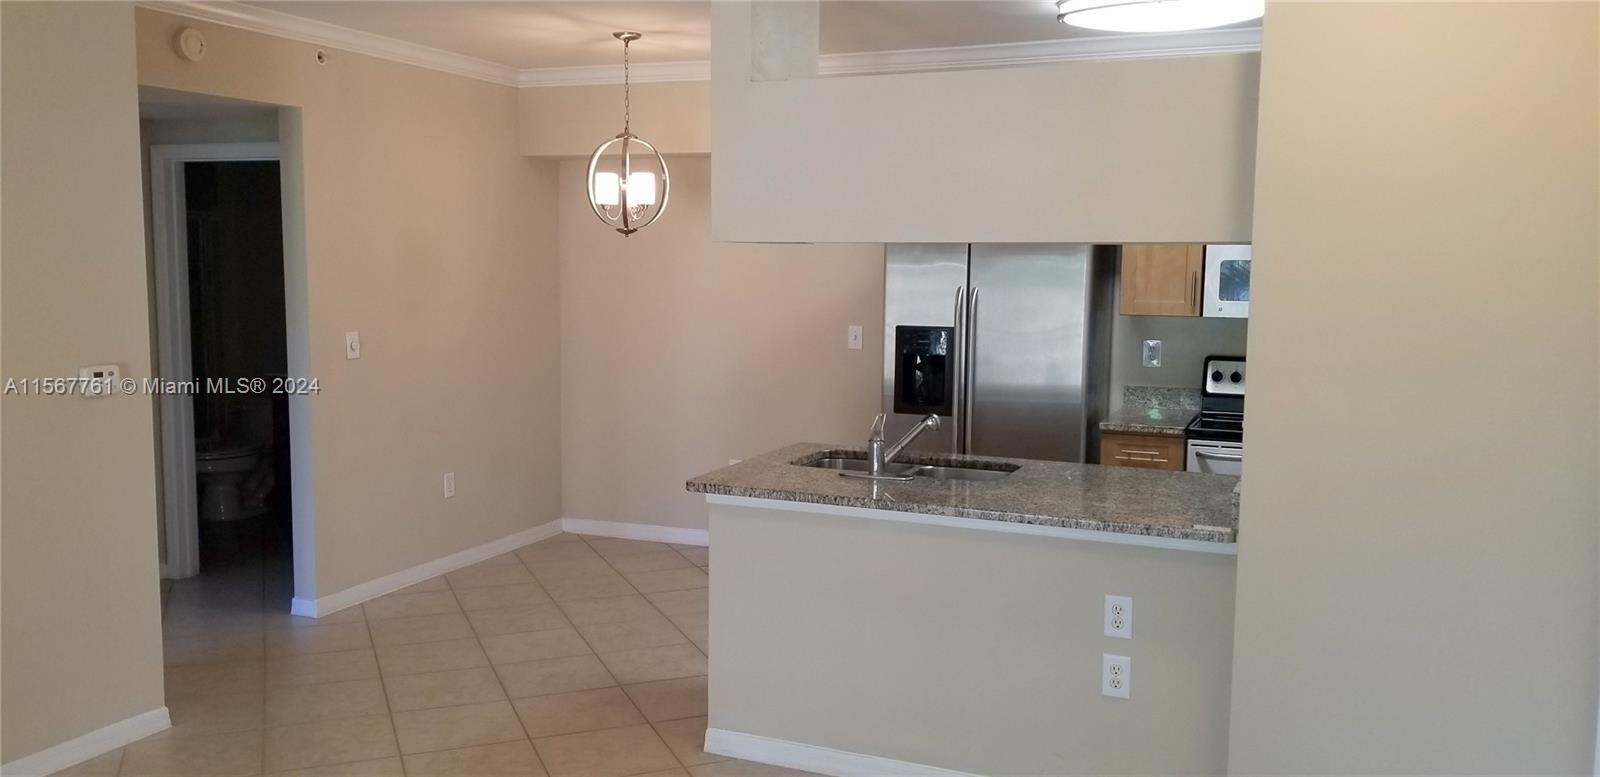 Photo of 6505 Emerald Dunes Dr #307 in West Palm Beach, FL